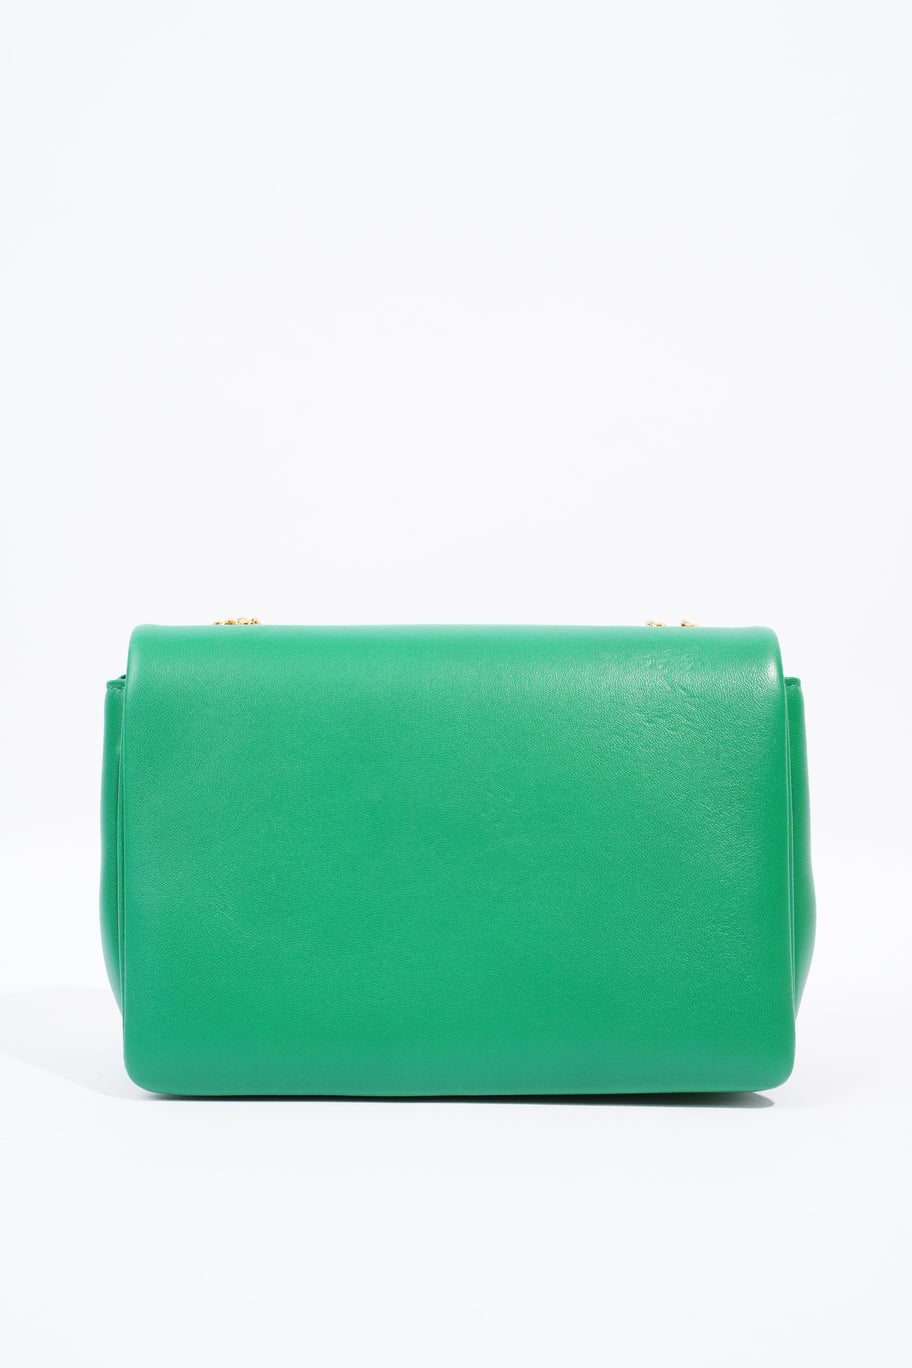 One Stud Flap Green Leather Small Image 5